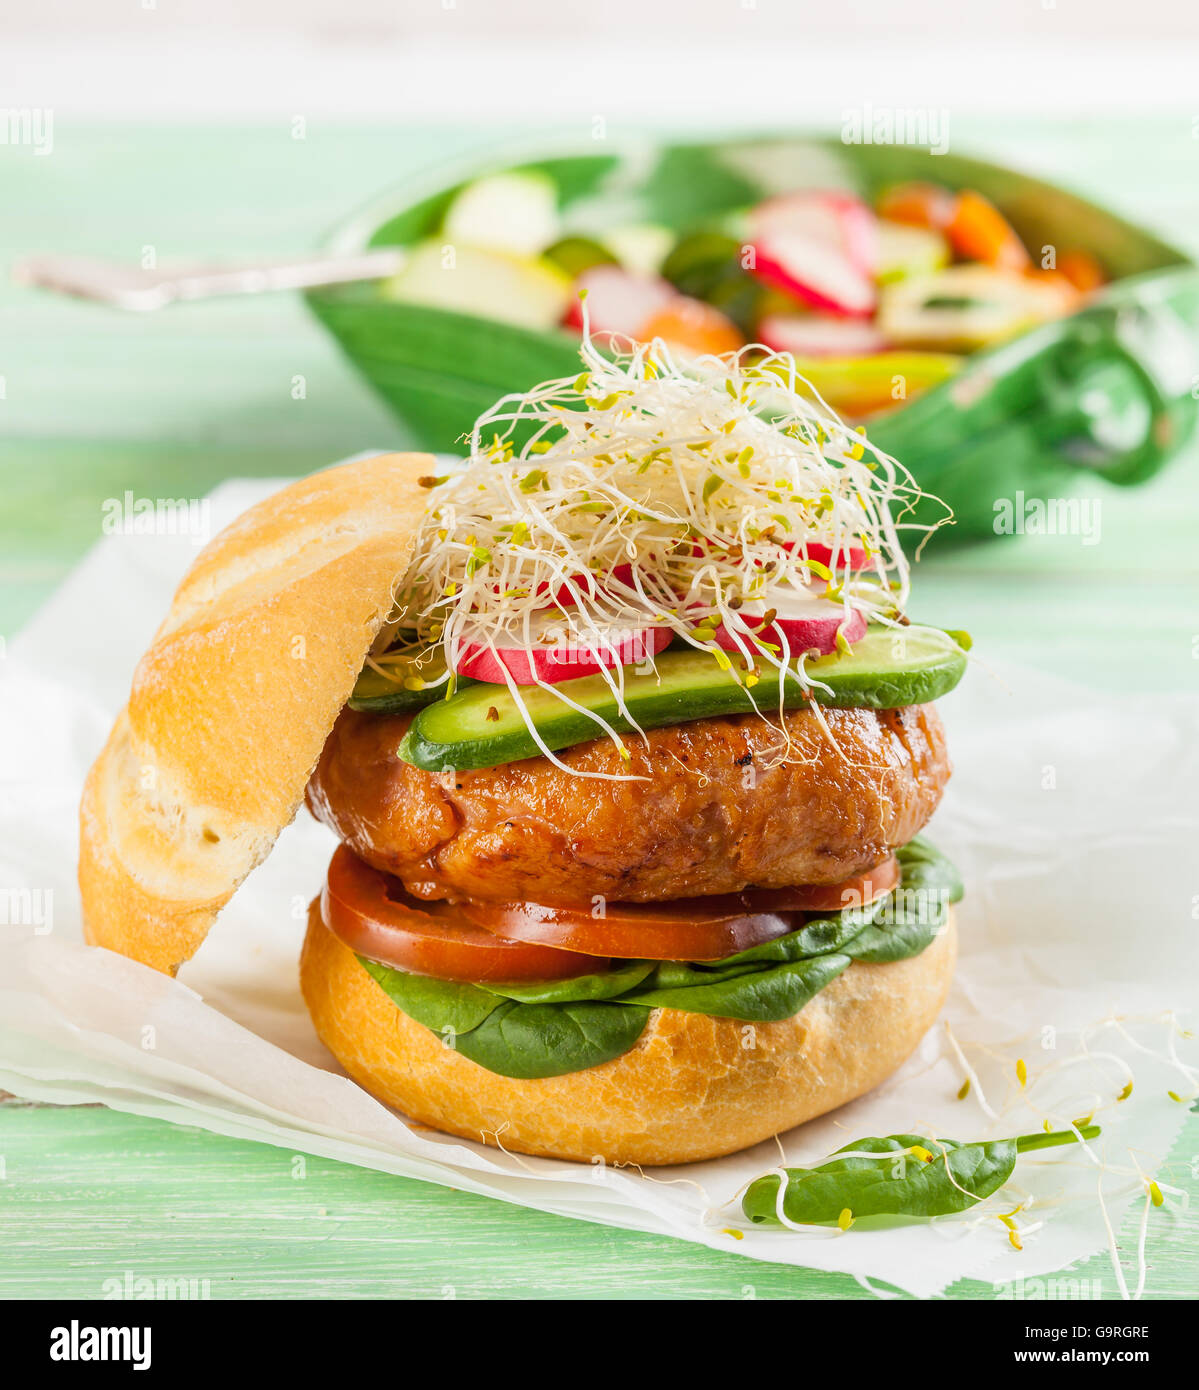 A delicious gourmet hamburger with fresh vegetables: tomato, spinach, pickles, radish and sprouts Stock Photo